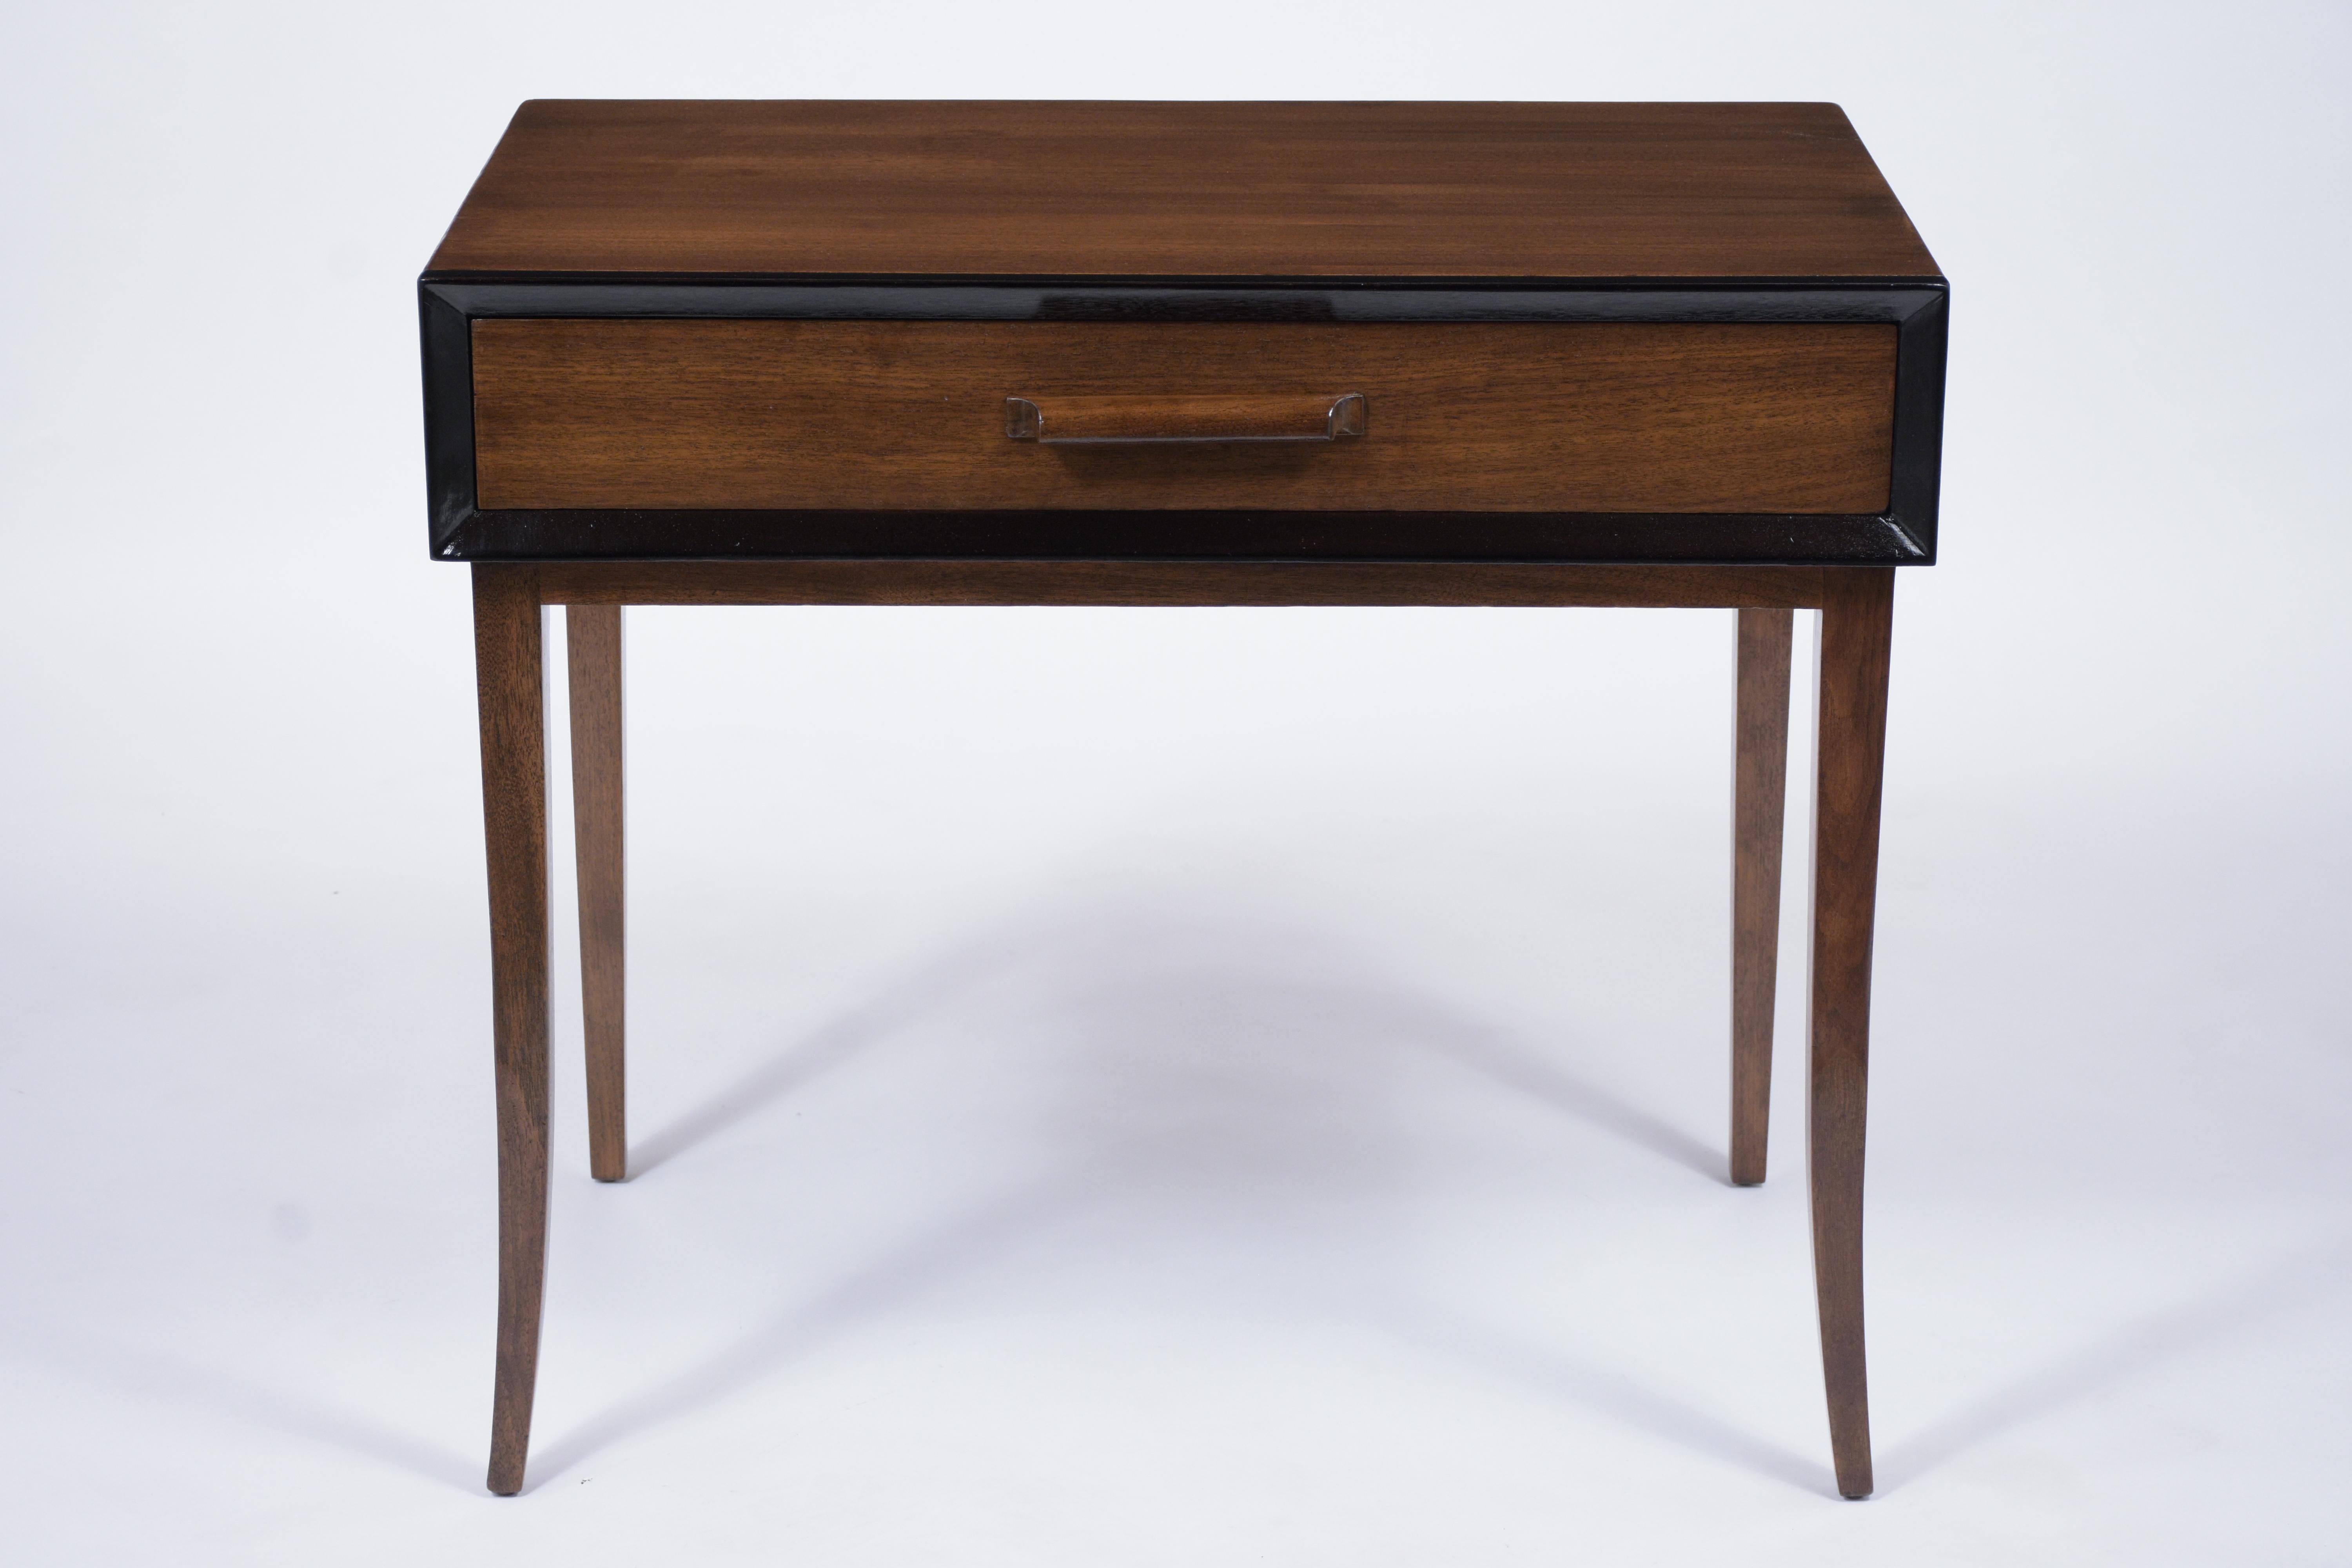 This Mid-Century Modern Desk crafted out of walnut has been completely restored and features walnut and black color combinations with a newly lacquered finish. The vanity table has ebonized details on the molding, comes with a large drawer with a